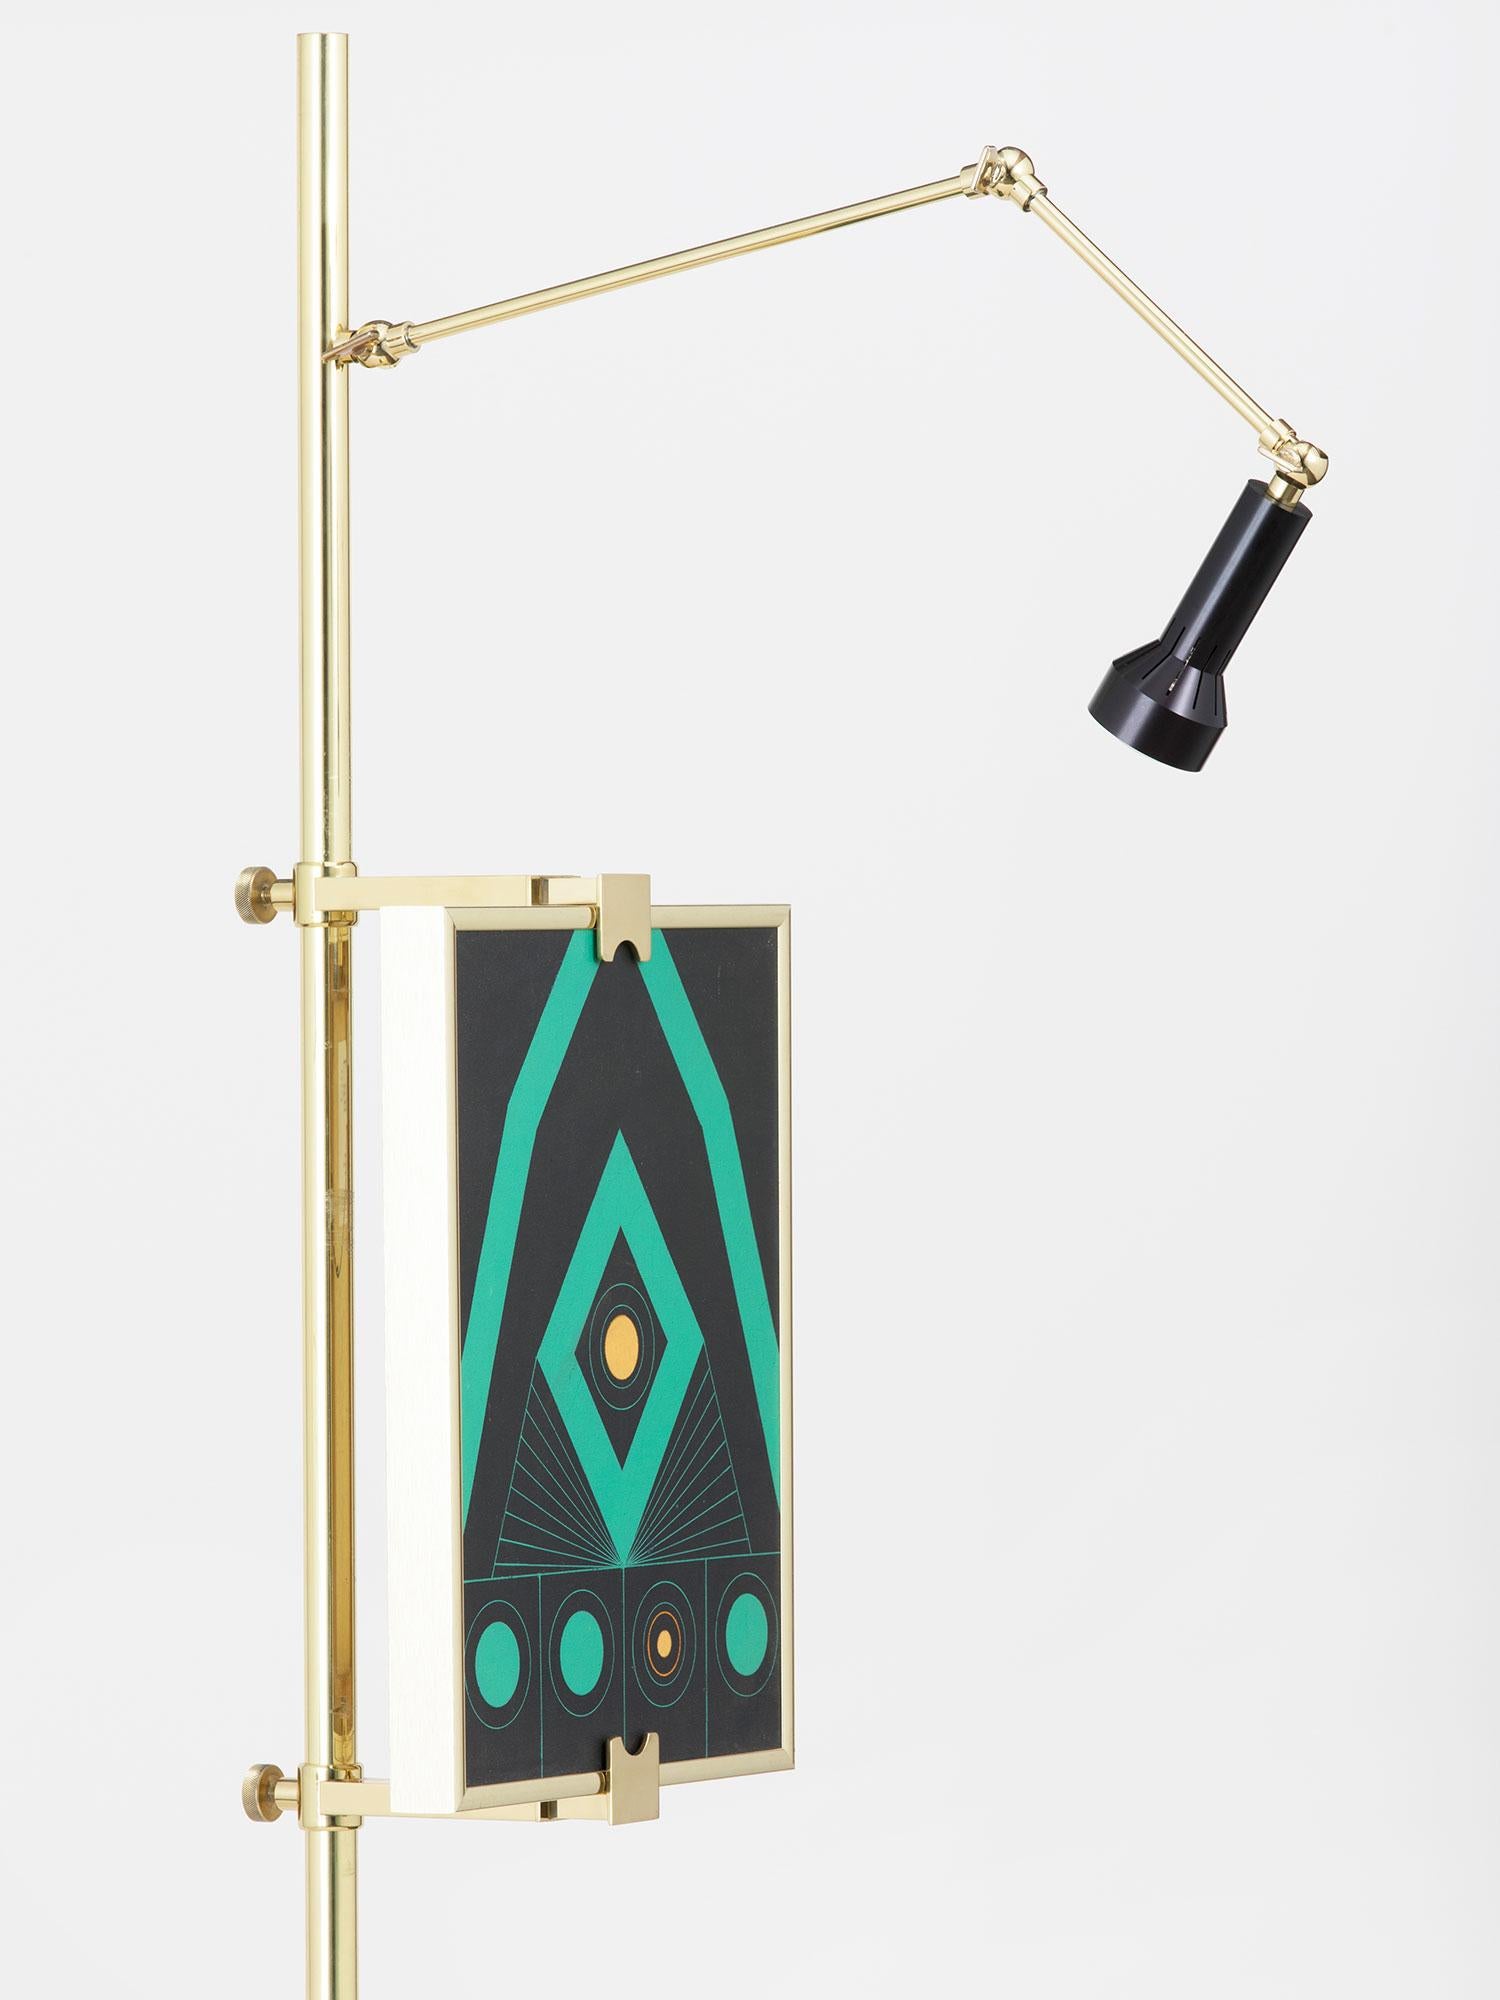 Tall floor lamp with adjustable easel display for paintings and flat works in a luminous polished brass finish. This is a contemporary work based on the Classic Arredoluce model, made by hand in New York City.